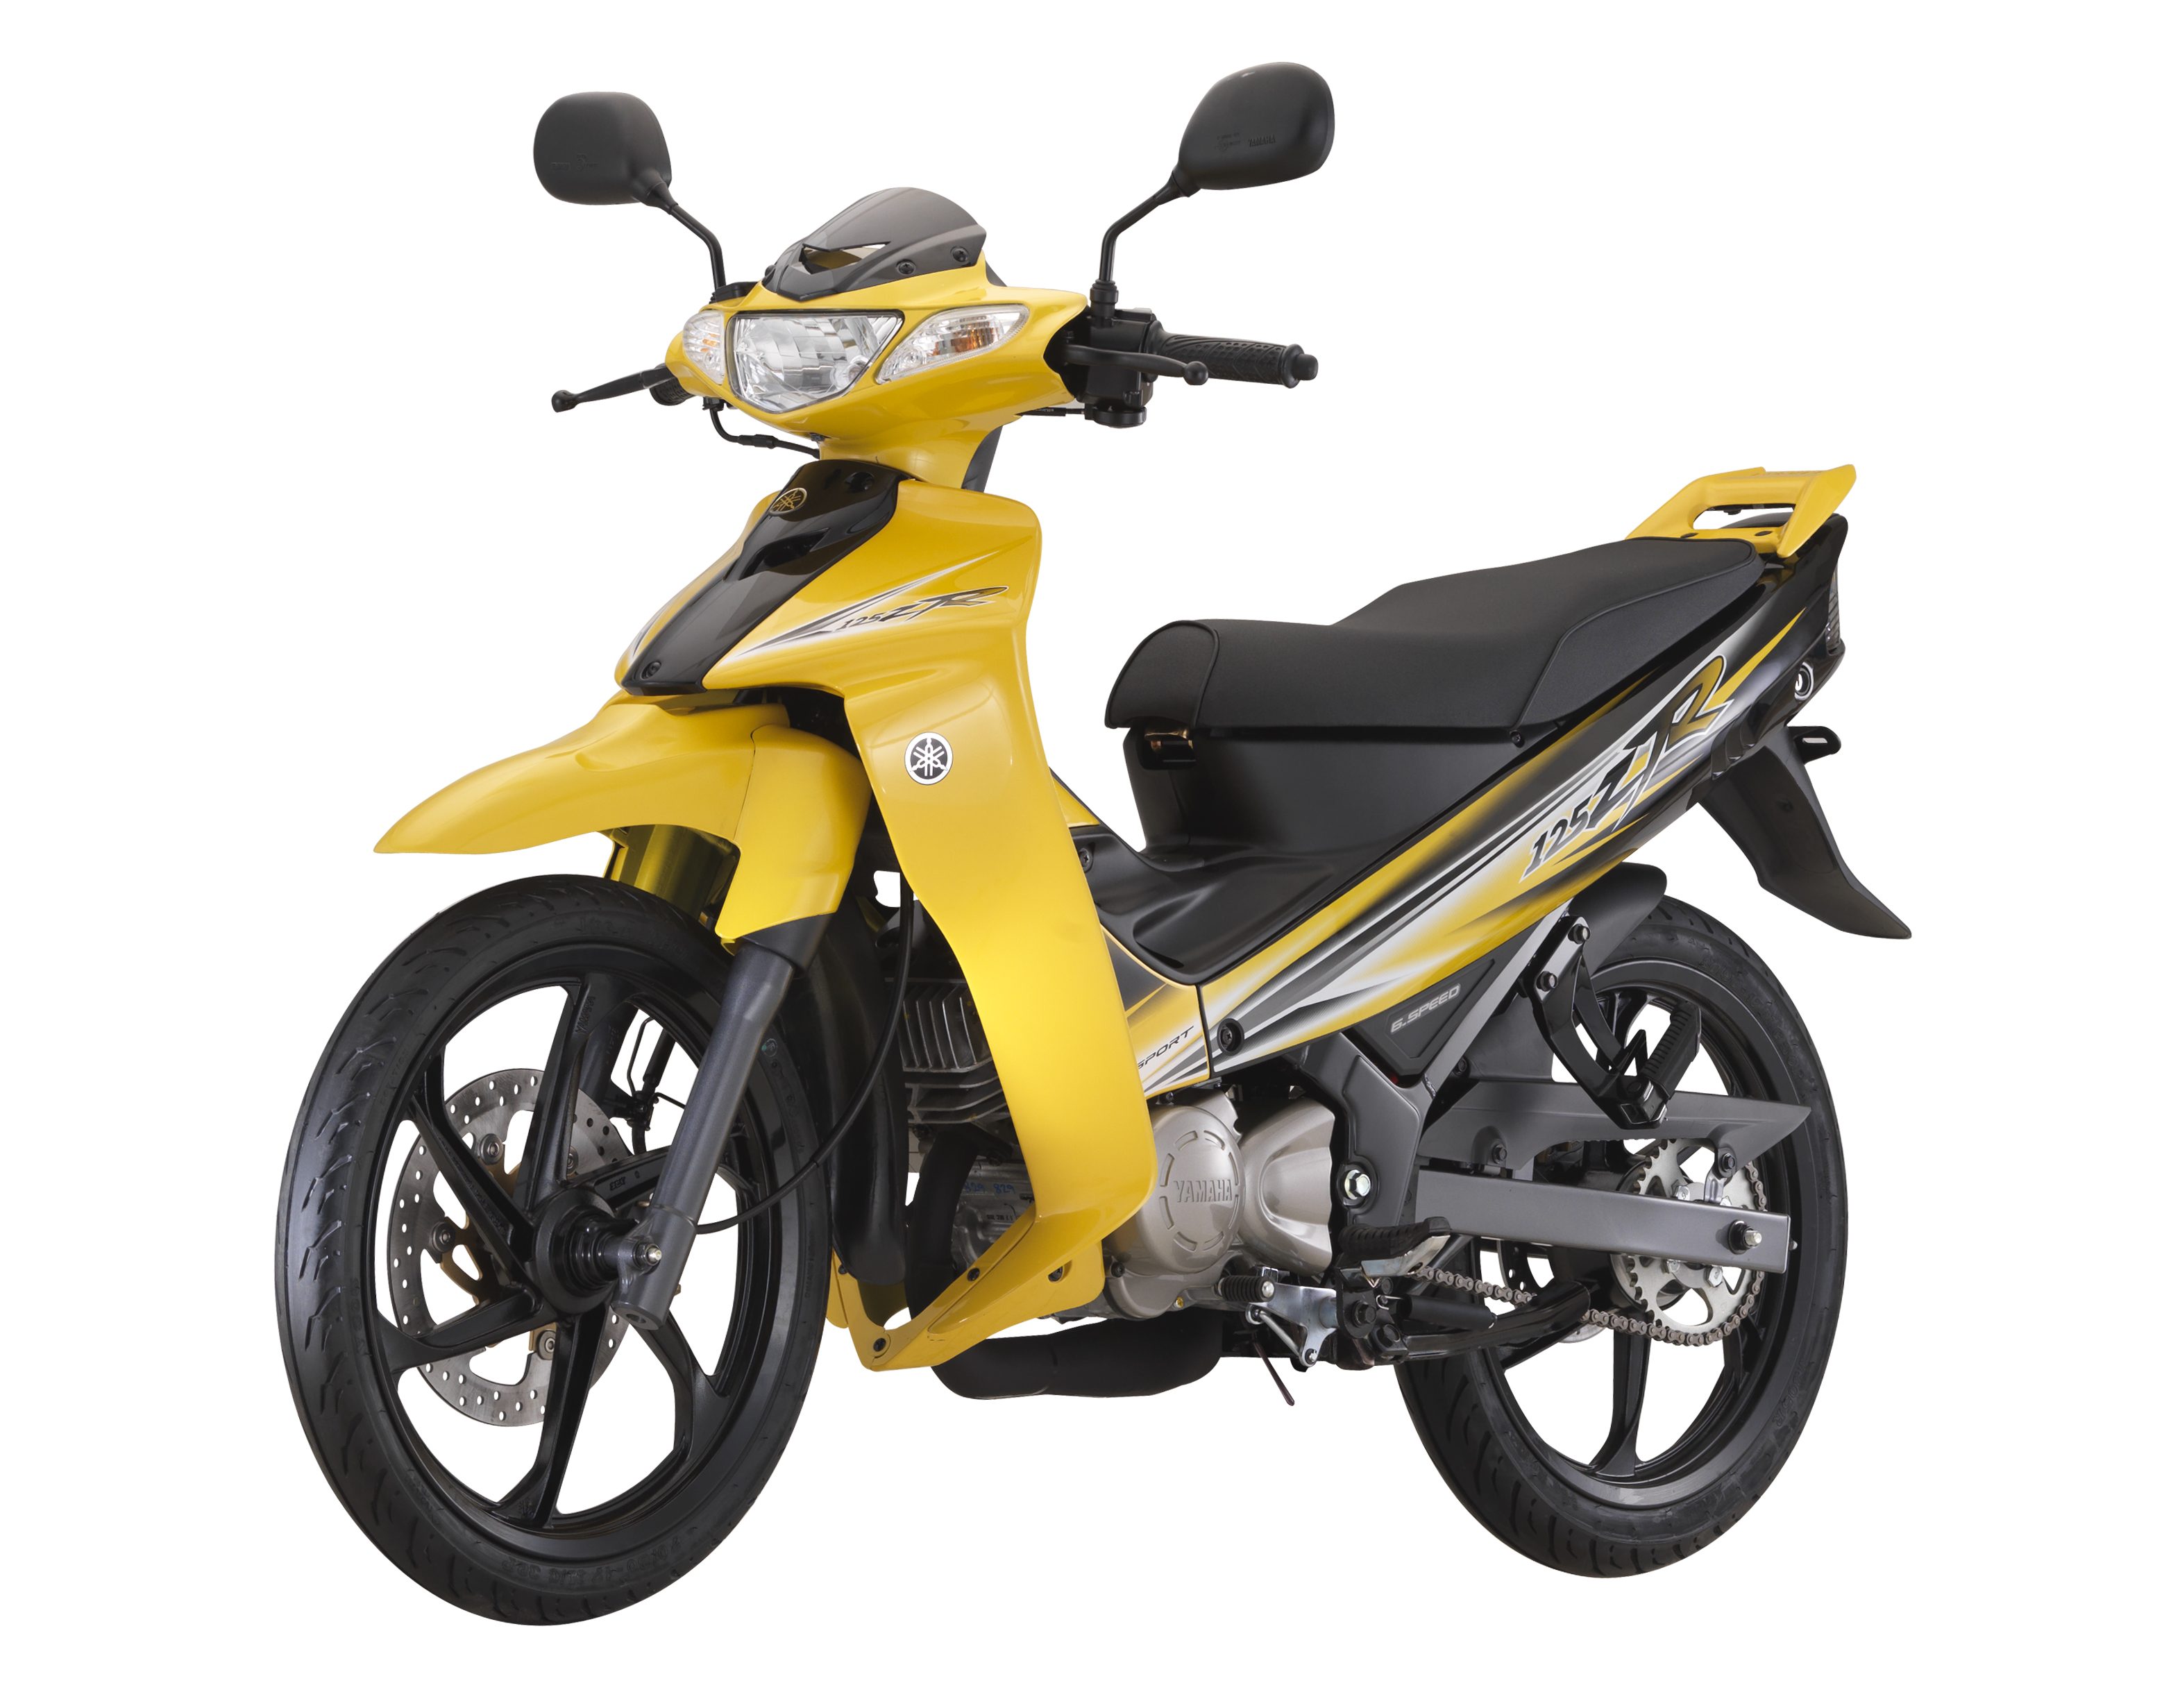 2016 Yamaha 125ZR - now in yellow colour, RM7,269 16 Apr 27 Y125ZR 02 ...